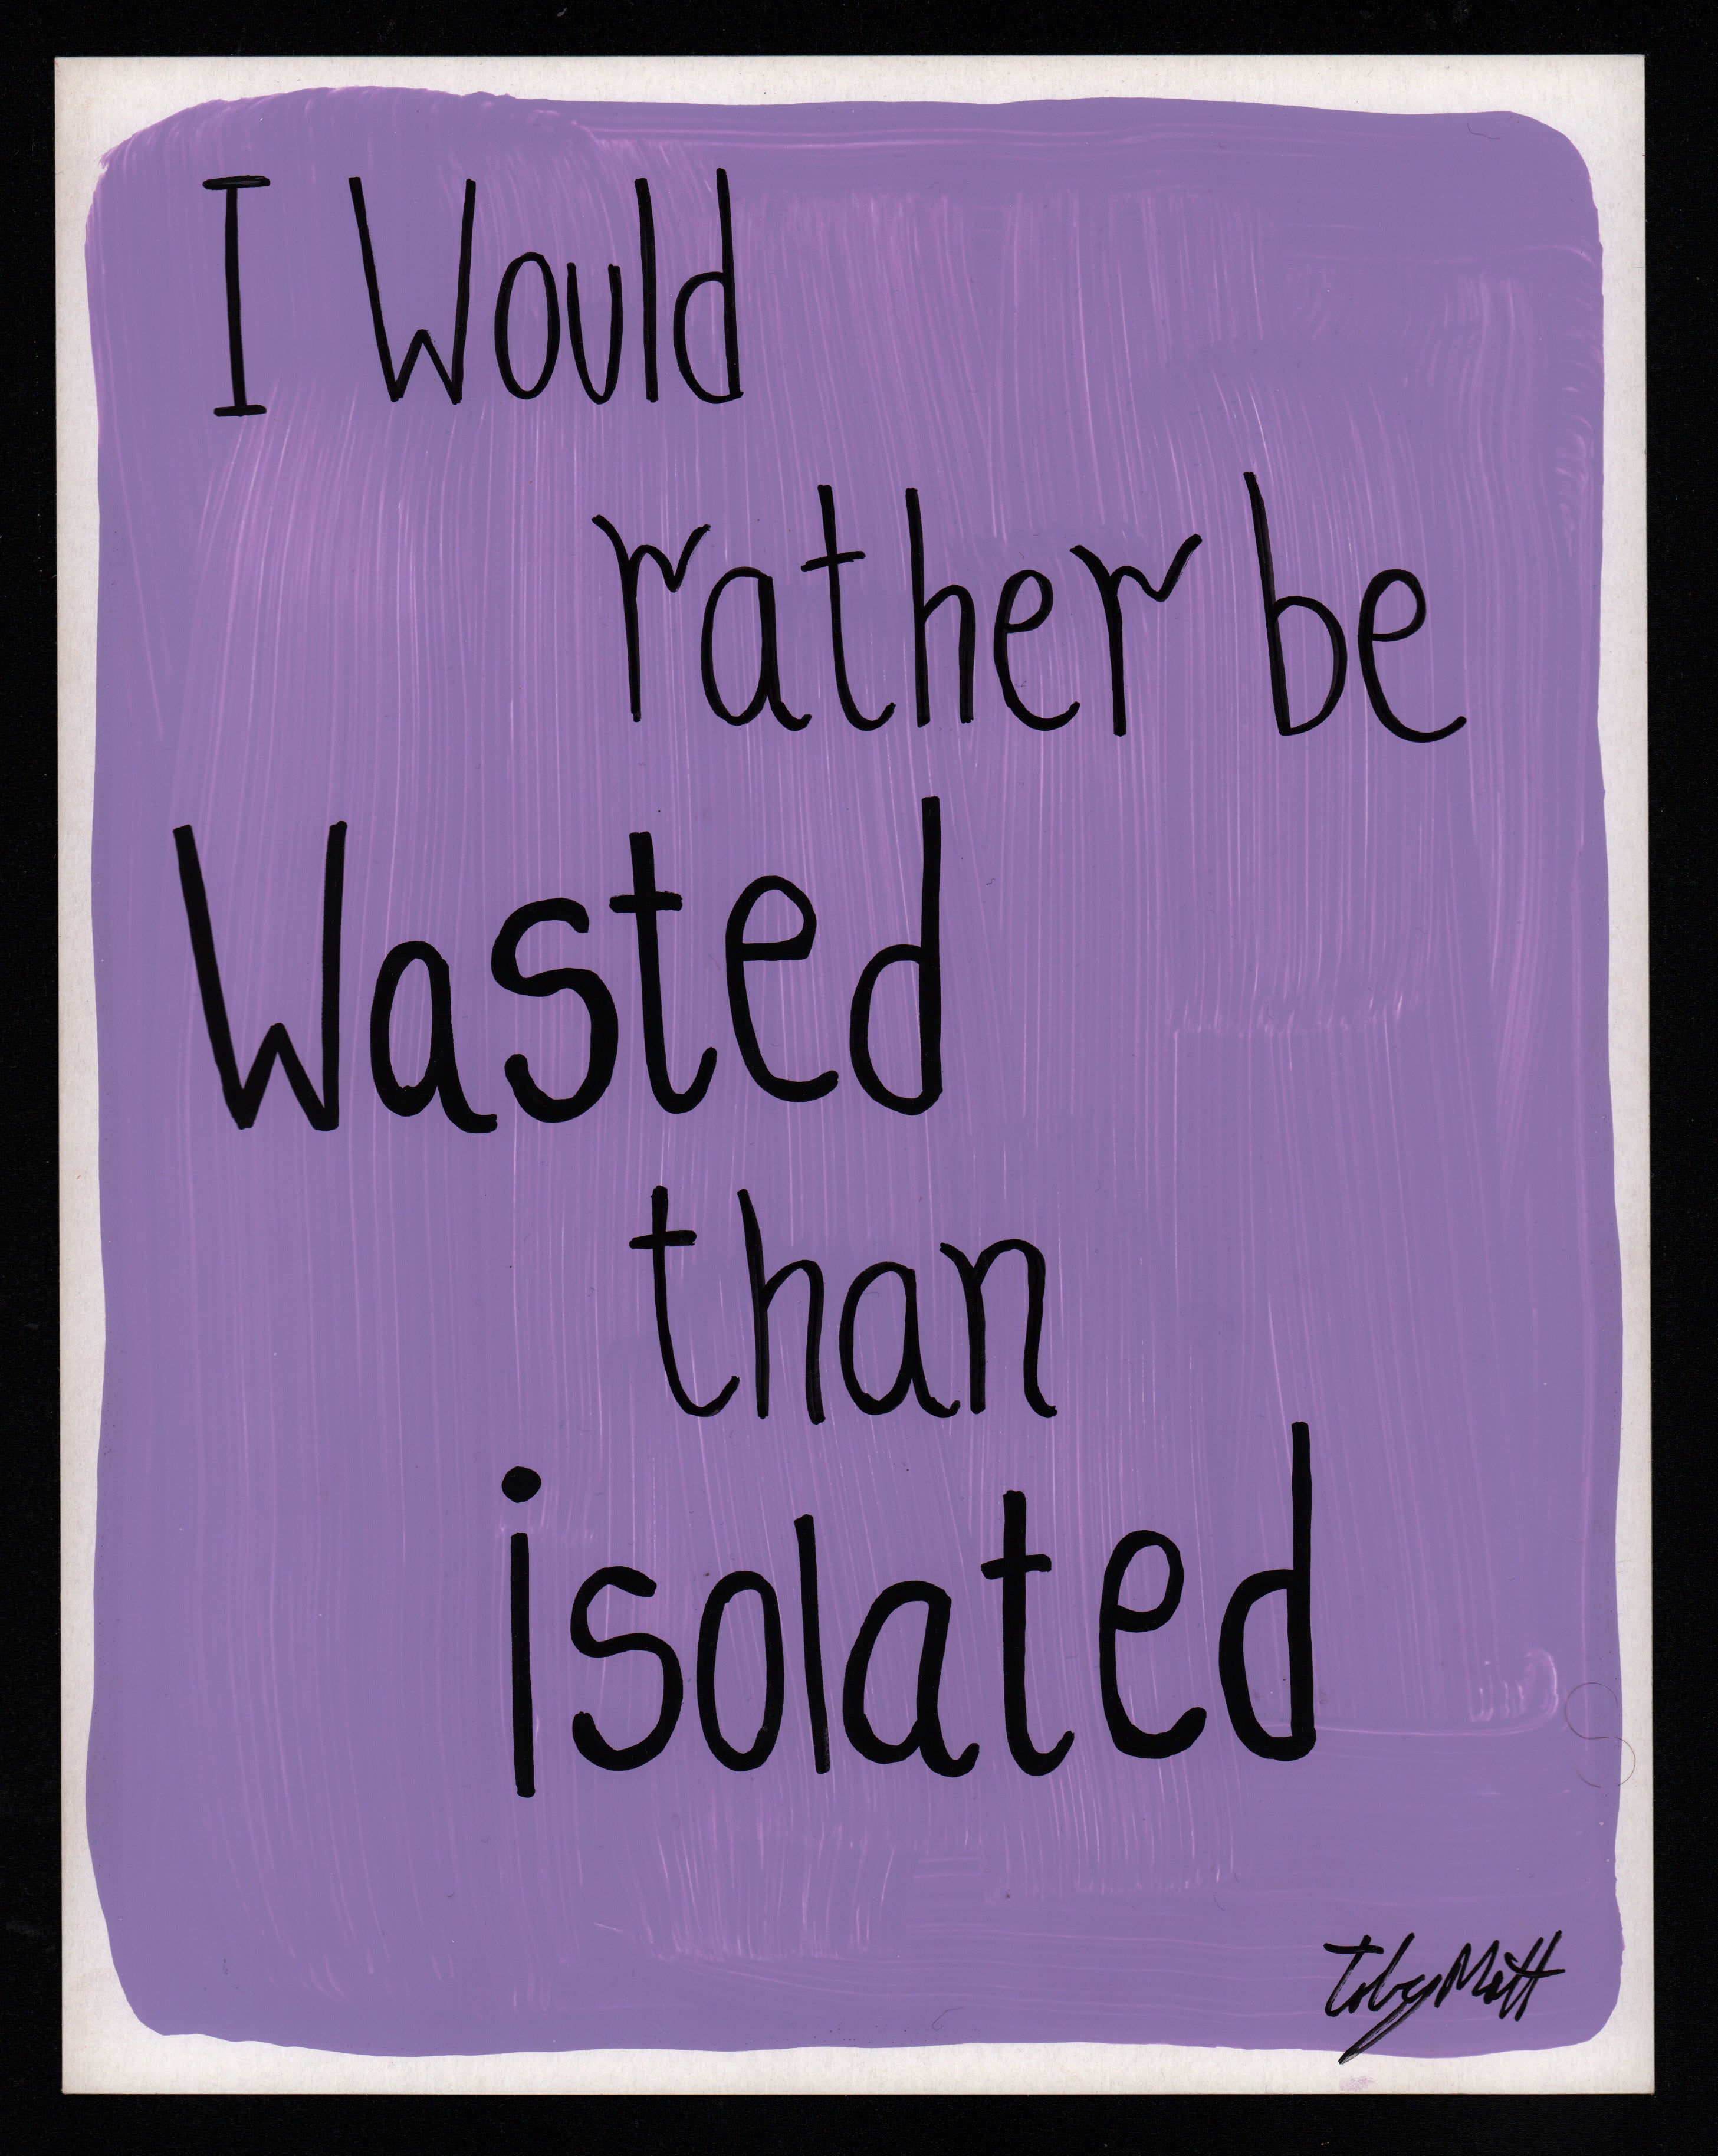 I would rather be wasted than isolated